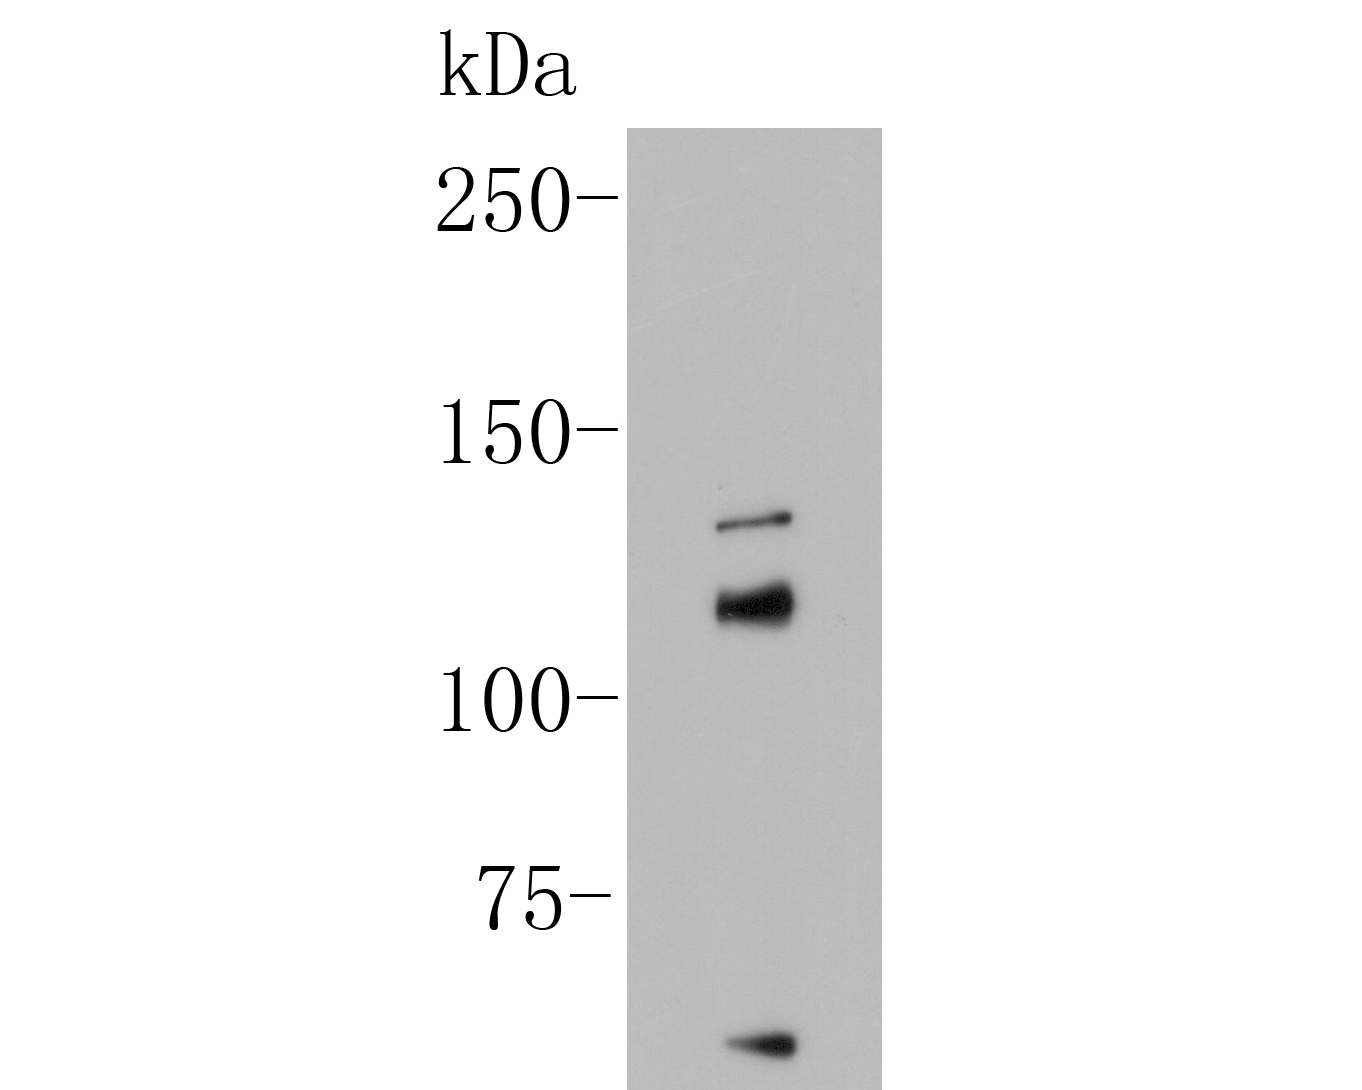 Western blot analysis of  on A549 cell lysate. Proteins were transferred to a PVDF membrane and blocked with 5% BSA in PBS for 1 hour at room temperature. The primary antibody (ER1902-04, 1/500) was used in 5% BSA at room temperature for 2 hours. Goat Anti-Rabbit IgG - HRP Secondary Antibody (HA1001) at 1:5,000 dilution was used for 1 hour at room temperature.